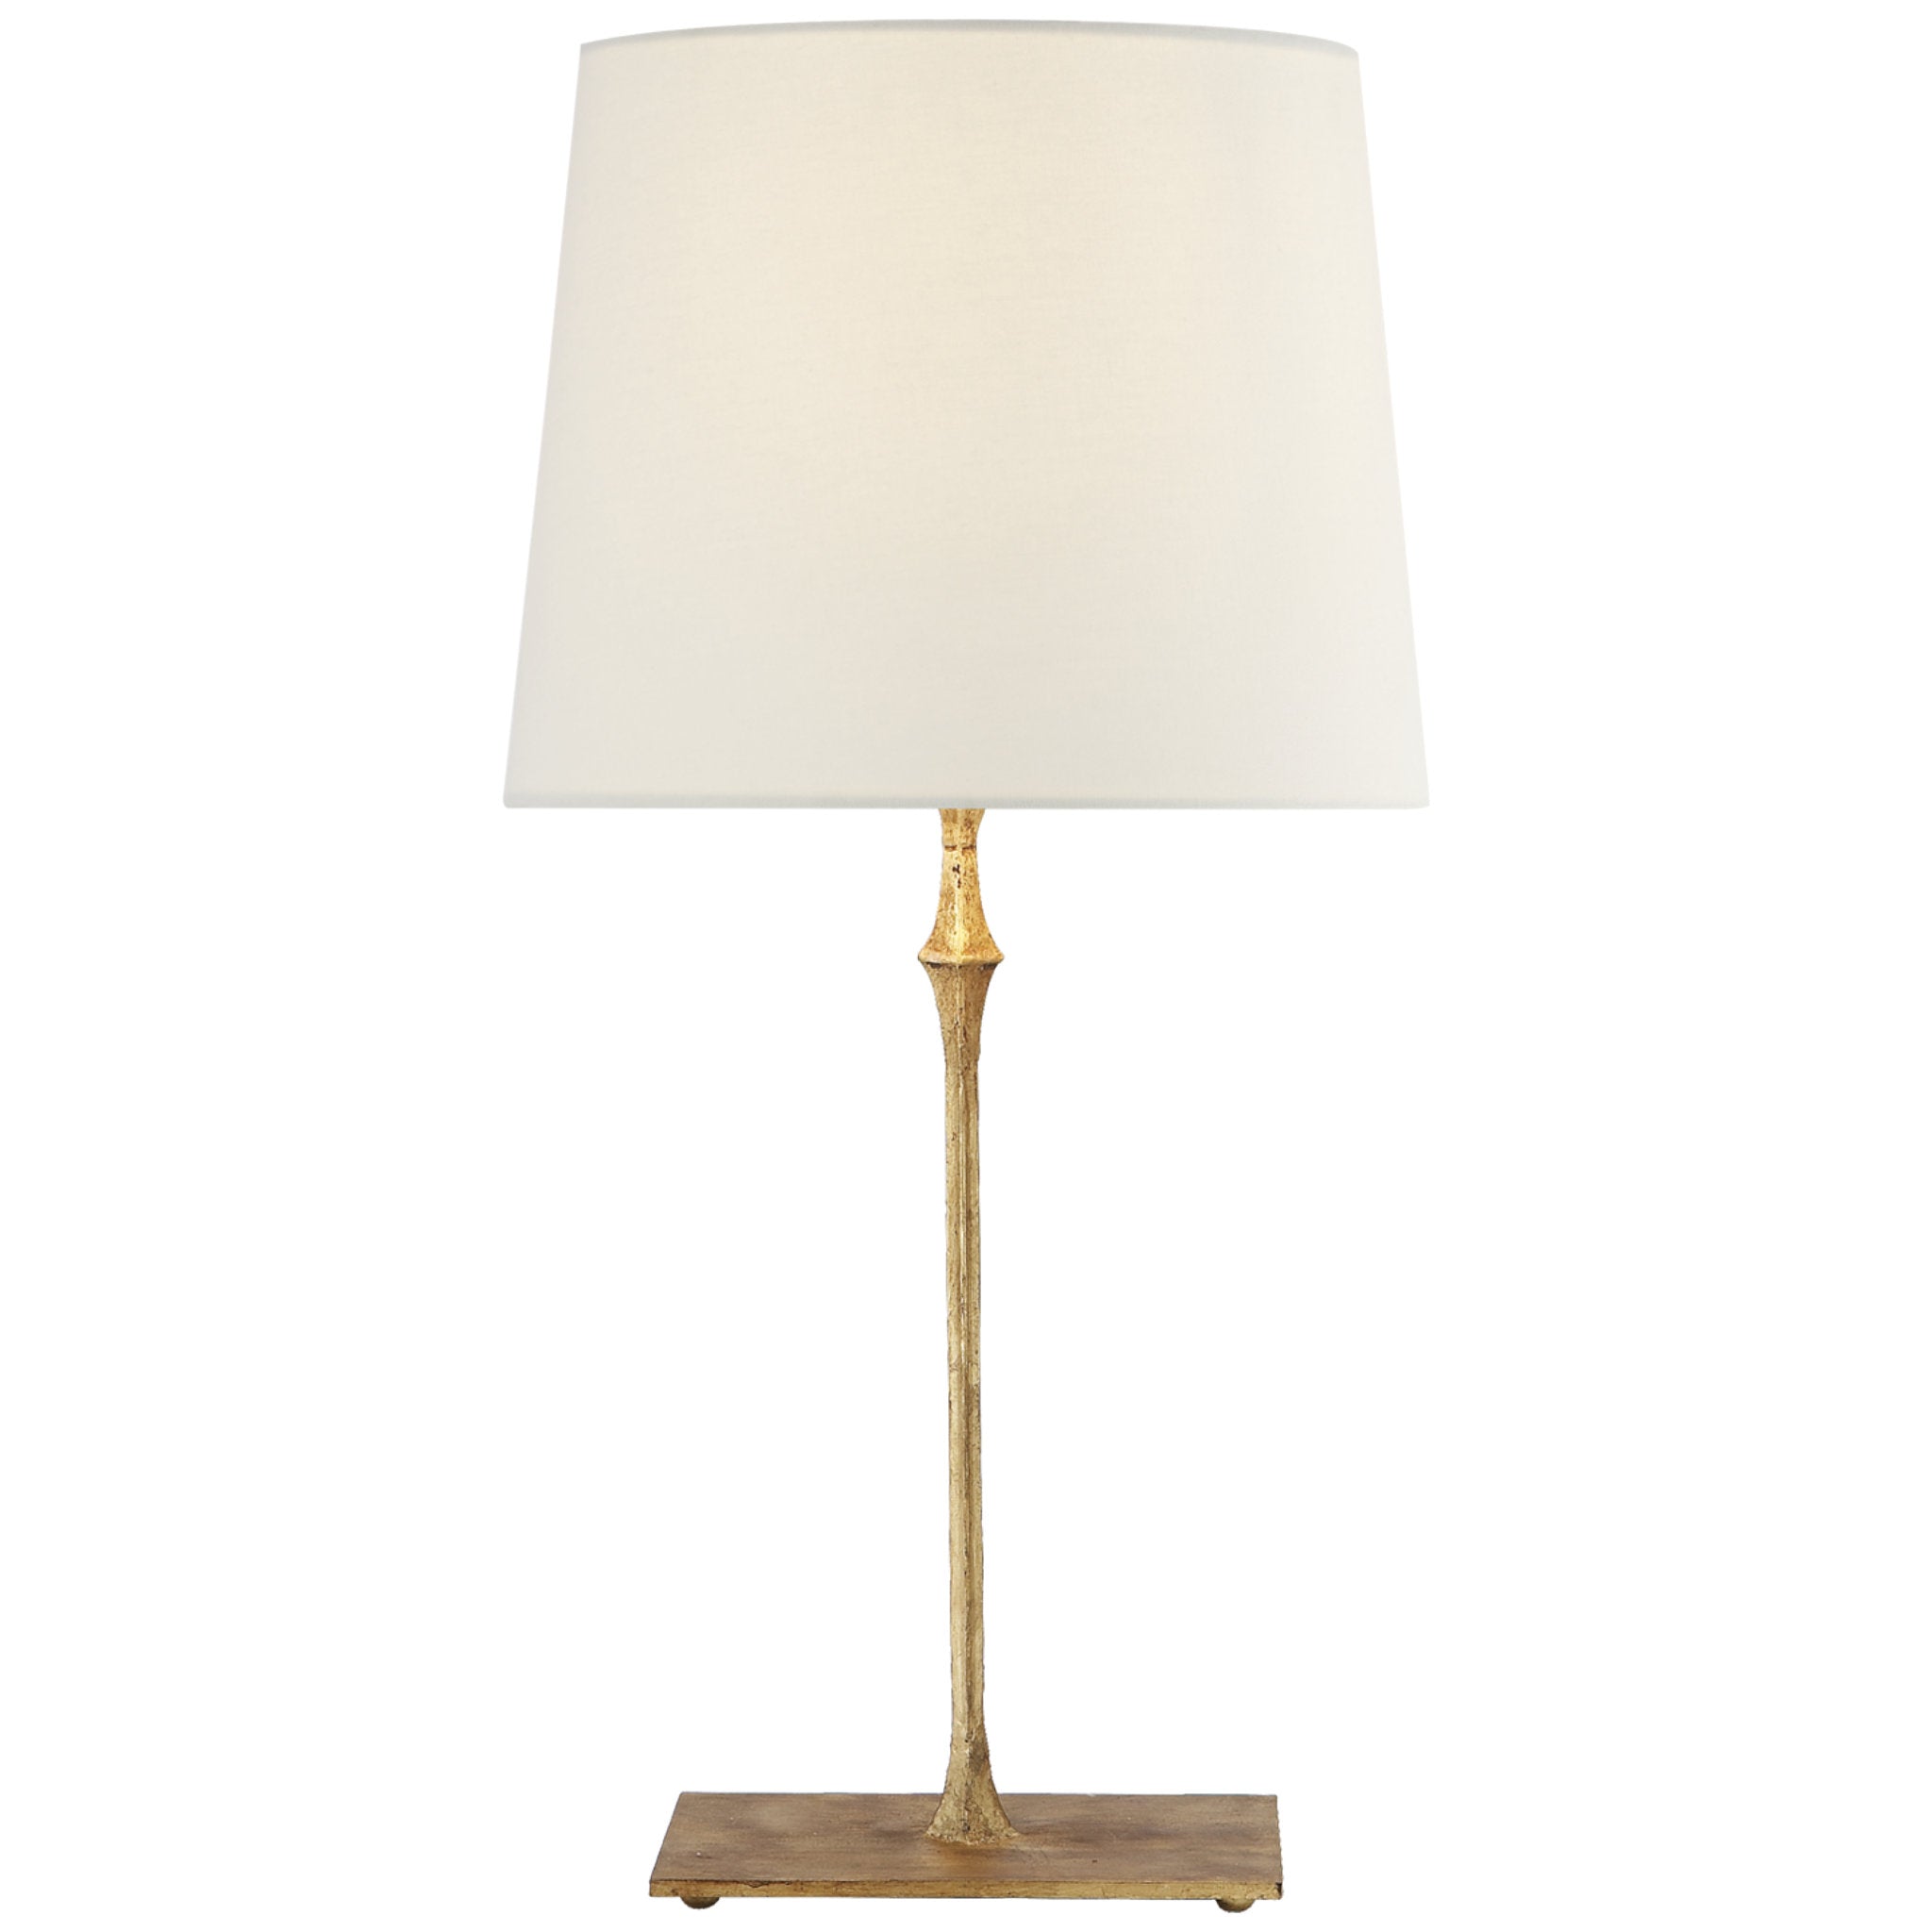 Visual Comfort Dauphine Bedside Lamp in Gilded Iron with Linen Shade